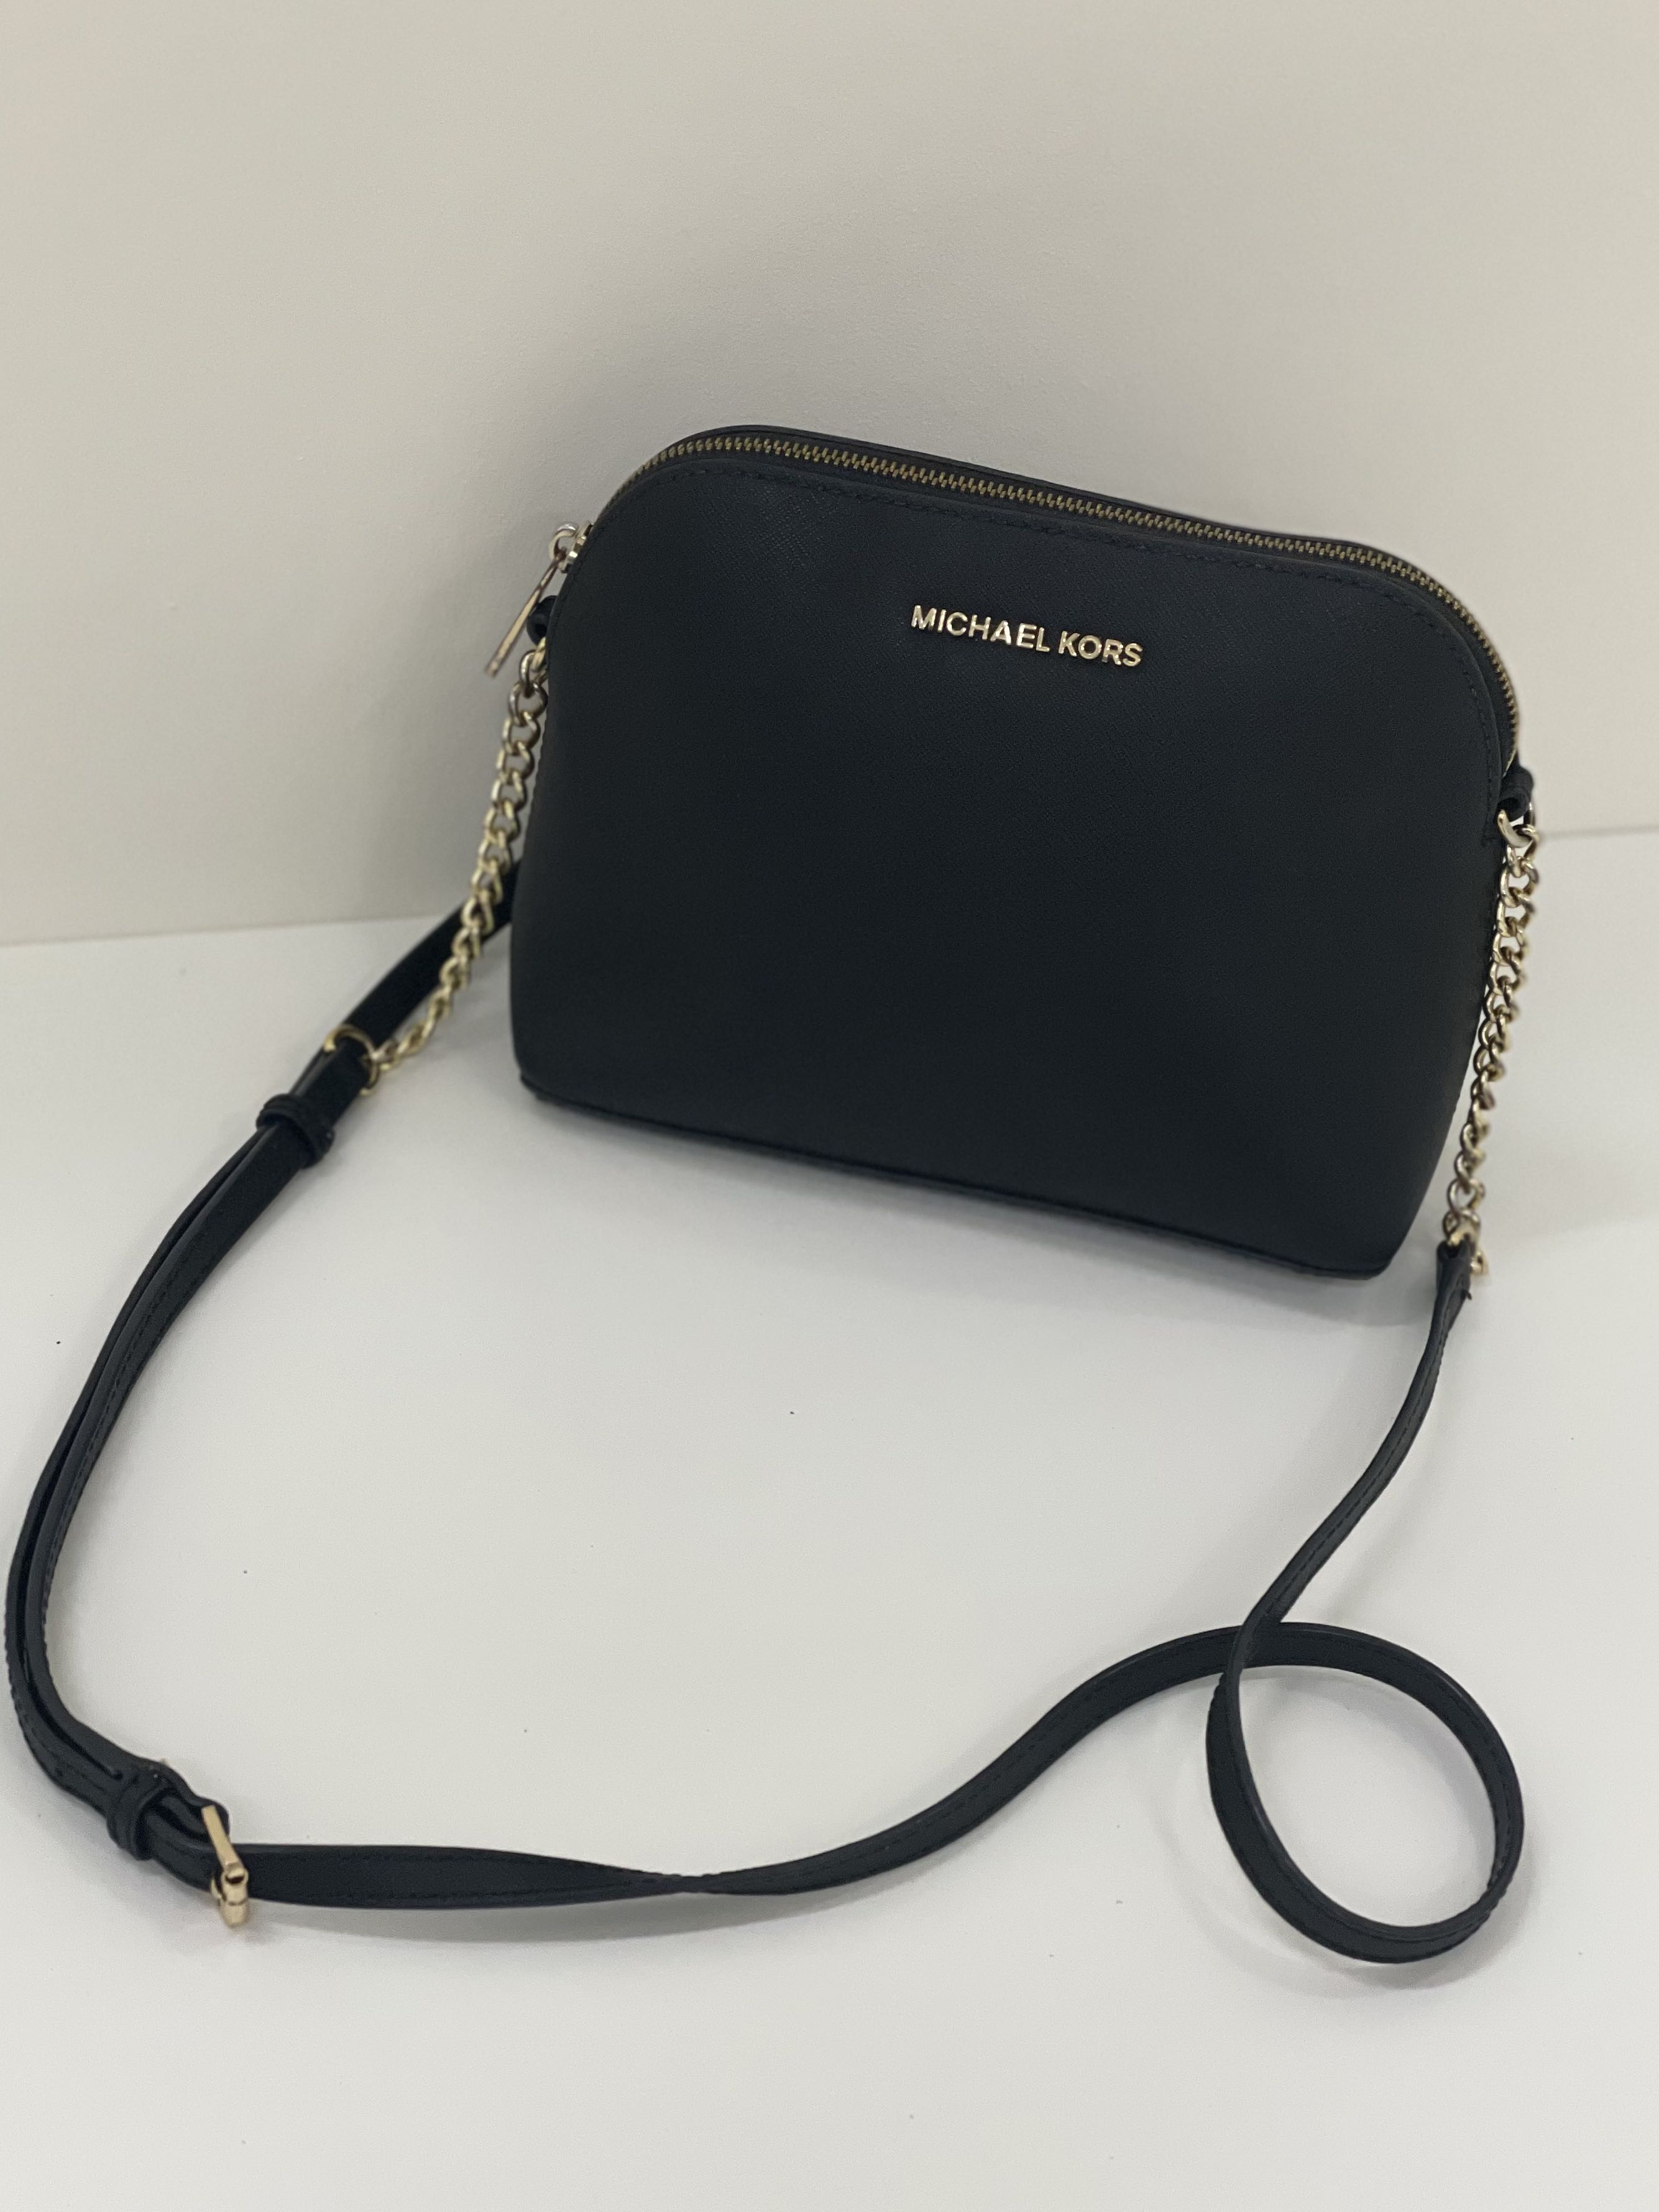 Michael Kors Black Silver Cindy Dome Crossbody Bag - $89 New With Tags -  From Nina